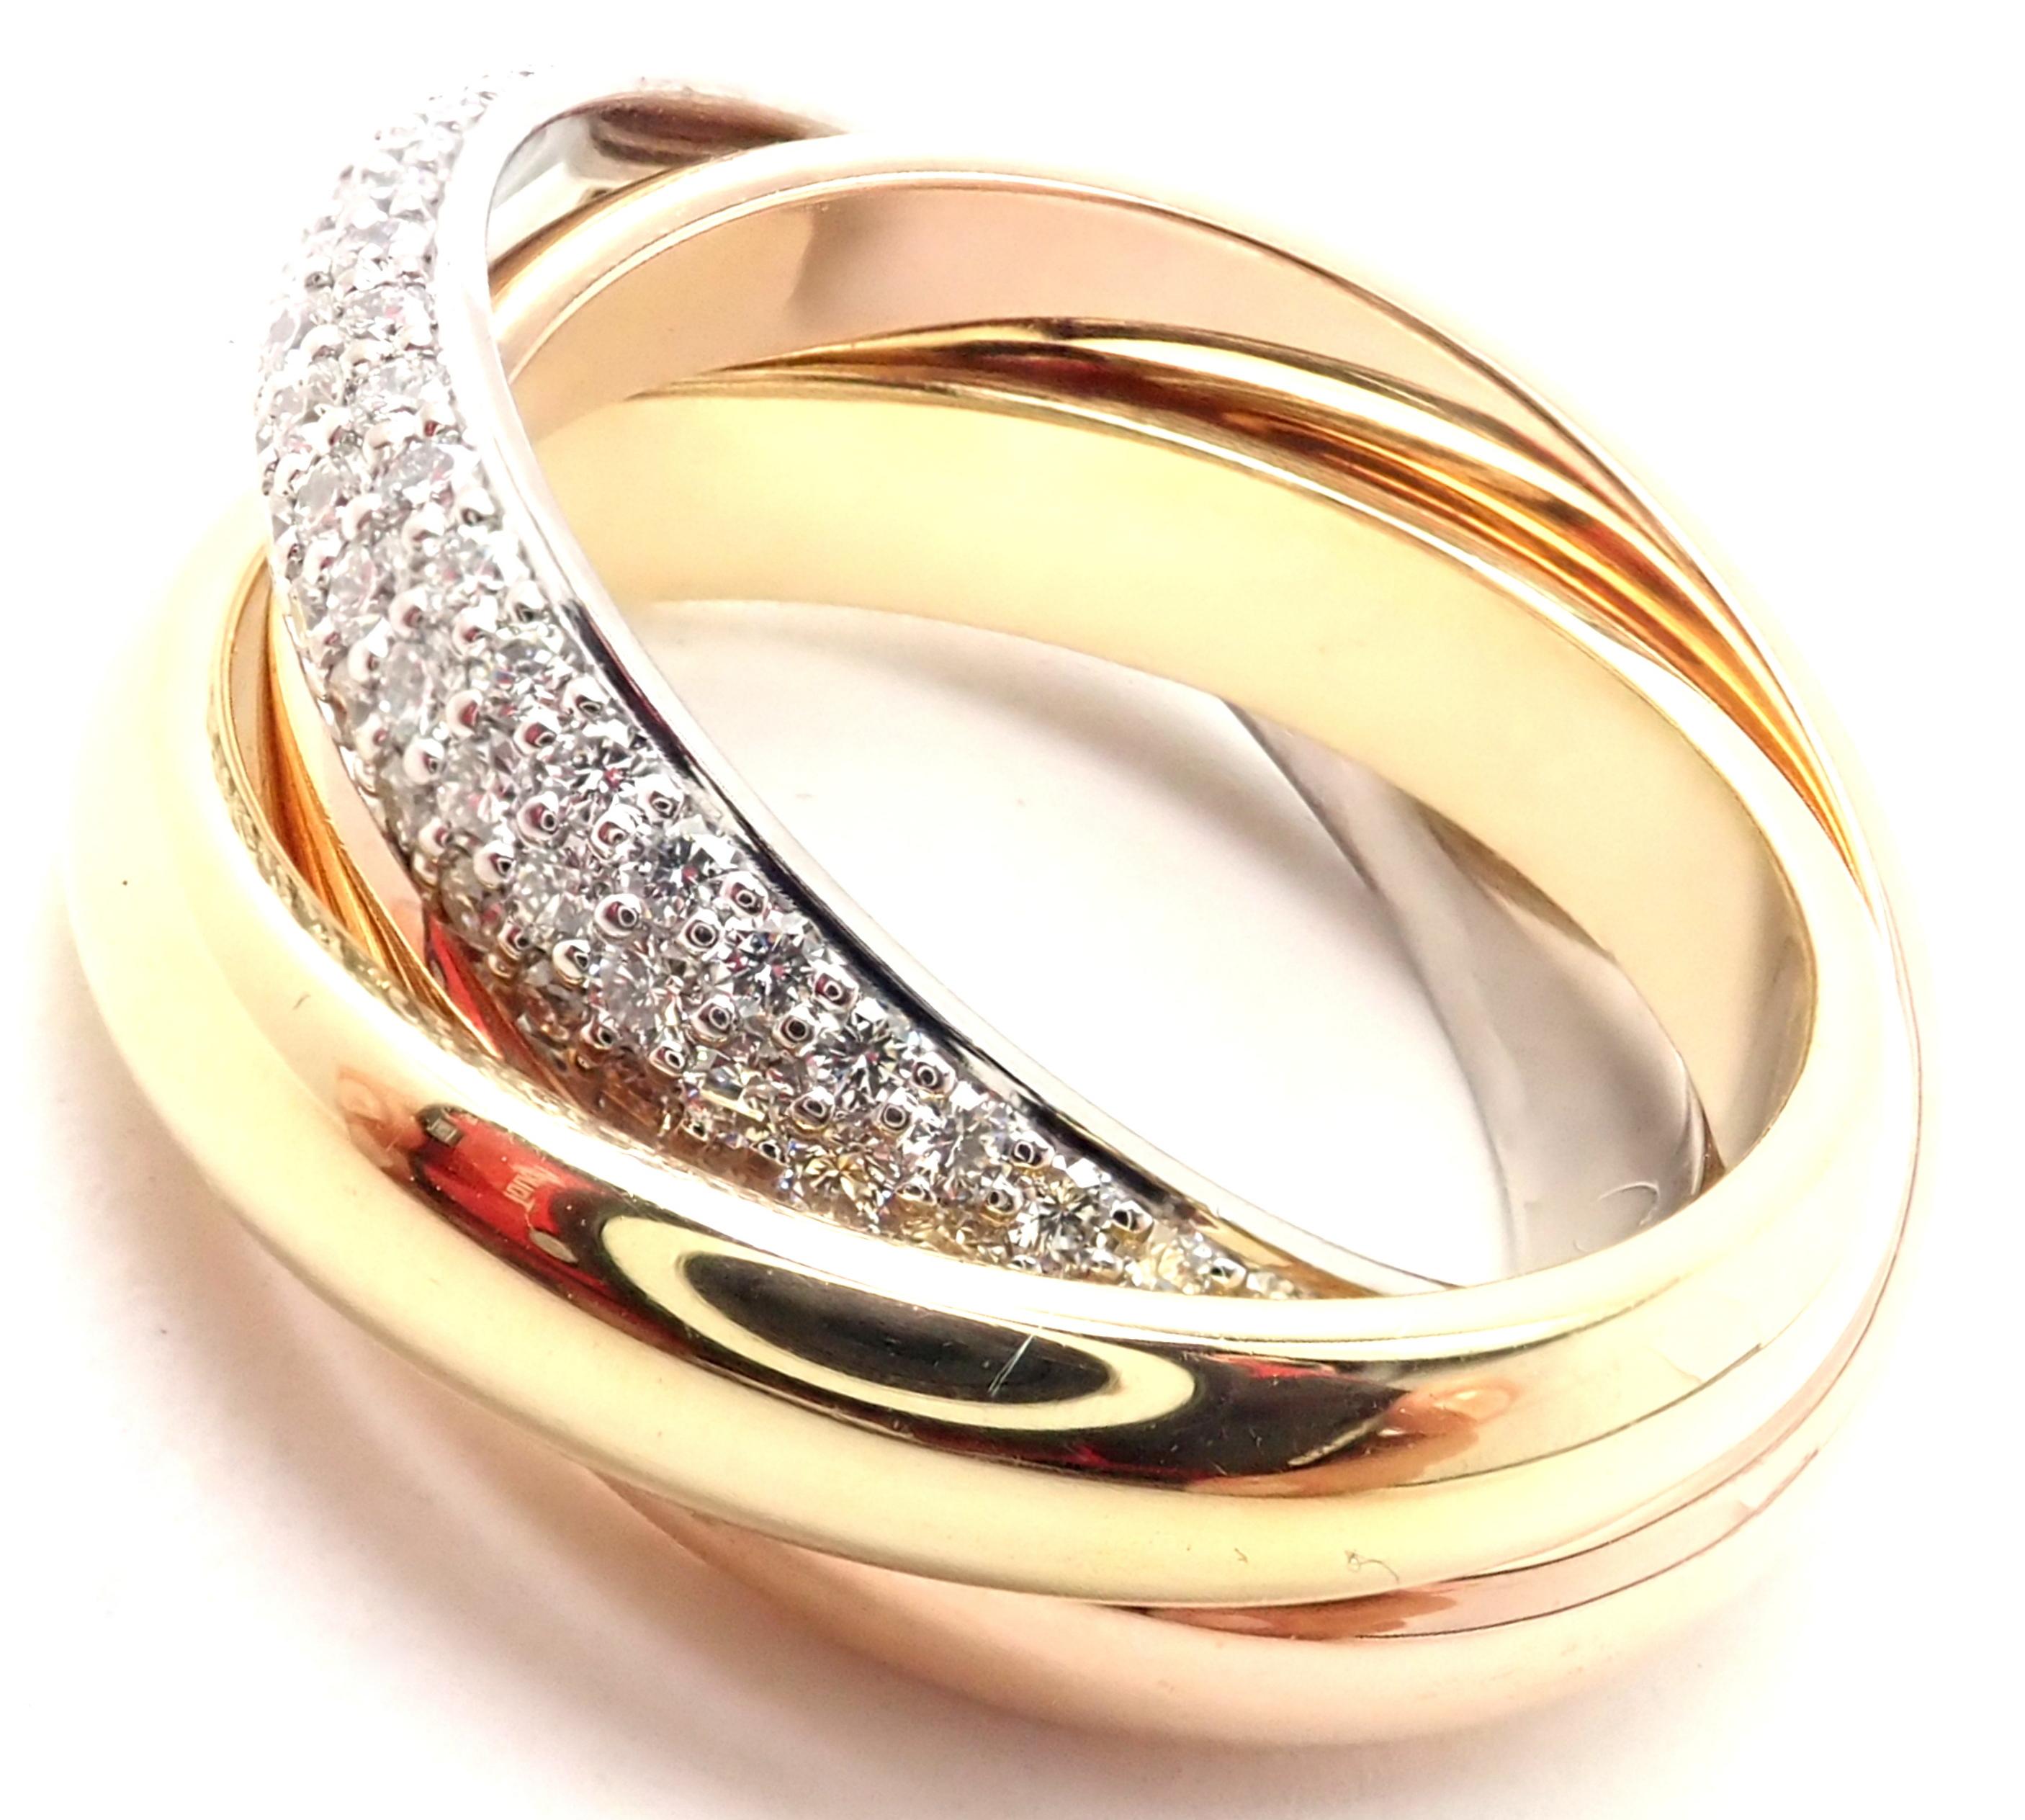 18k Tri-Color Gold Pave Diamond Trinity Band Ring by Cartier.
With 144 Round Brilliant cut diamonds VVS1 clarity, E-F color total weight approx. .99ct
This ring comes with Cartier box and Cartier service paper.
Details:
Size: European 53 US 6